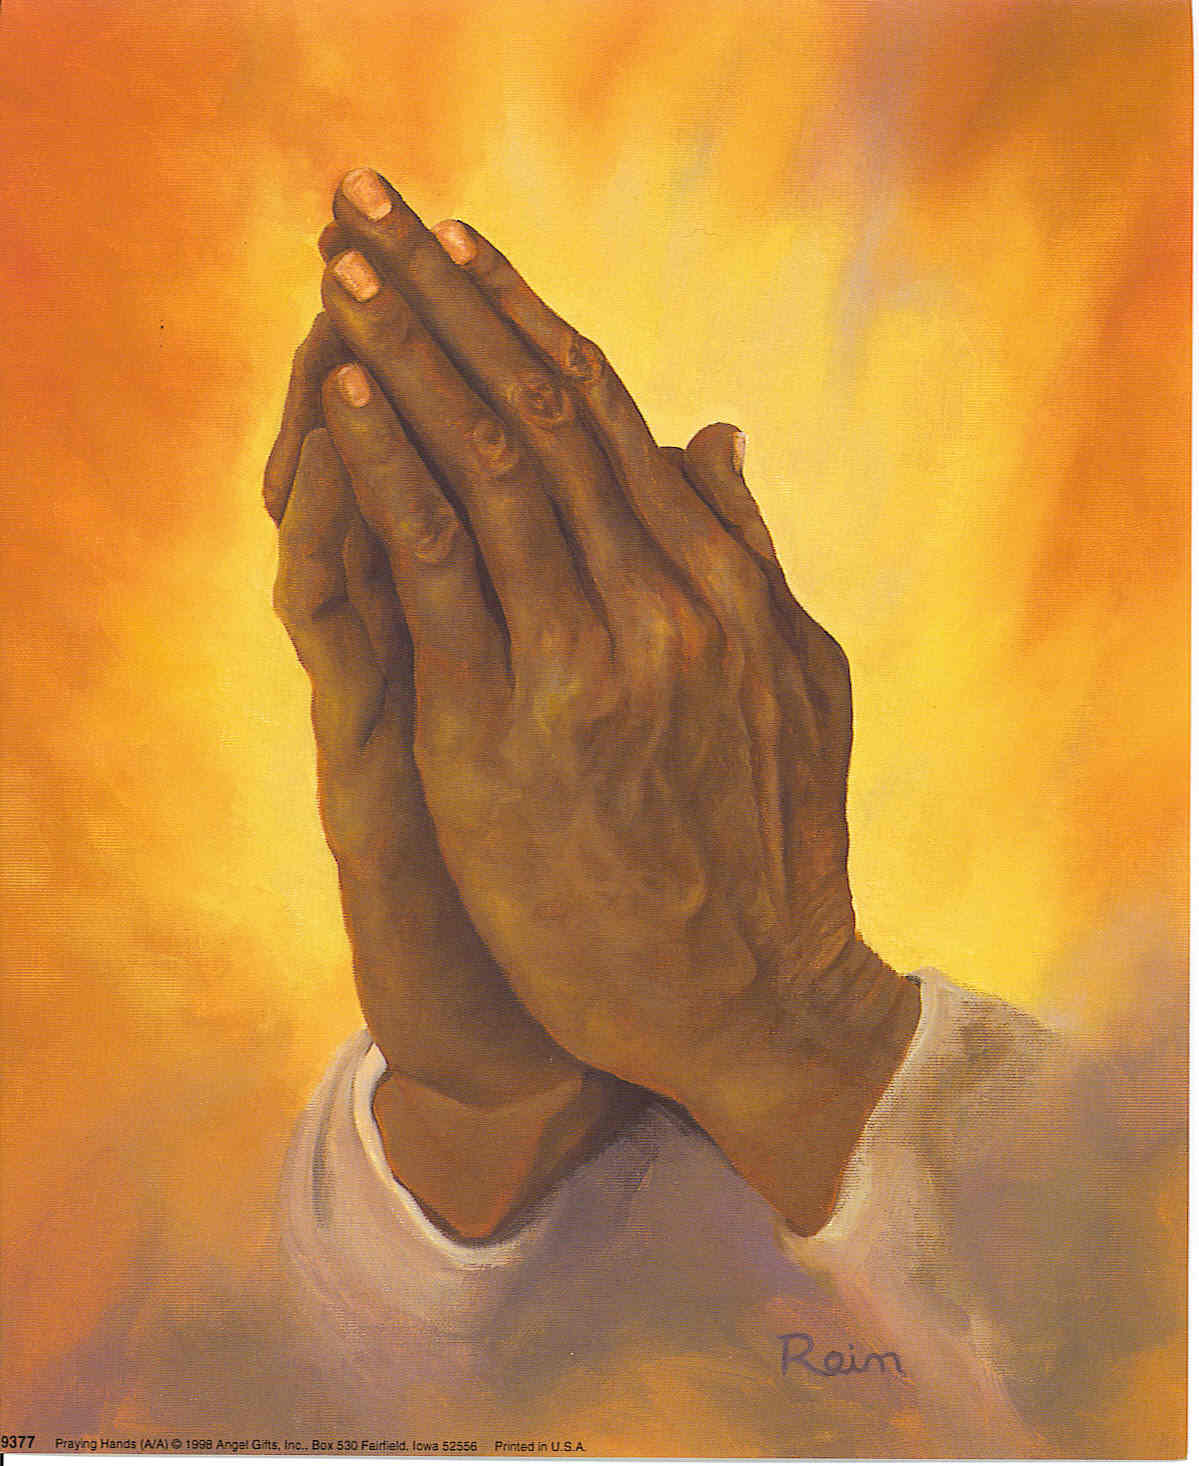 image For > Open Praying Hands Image